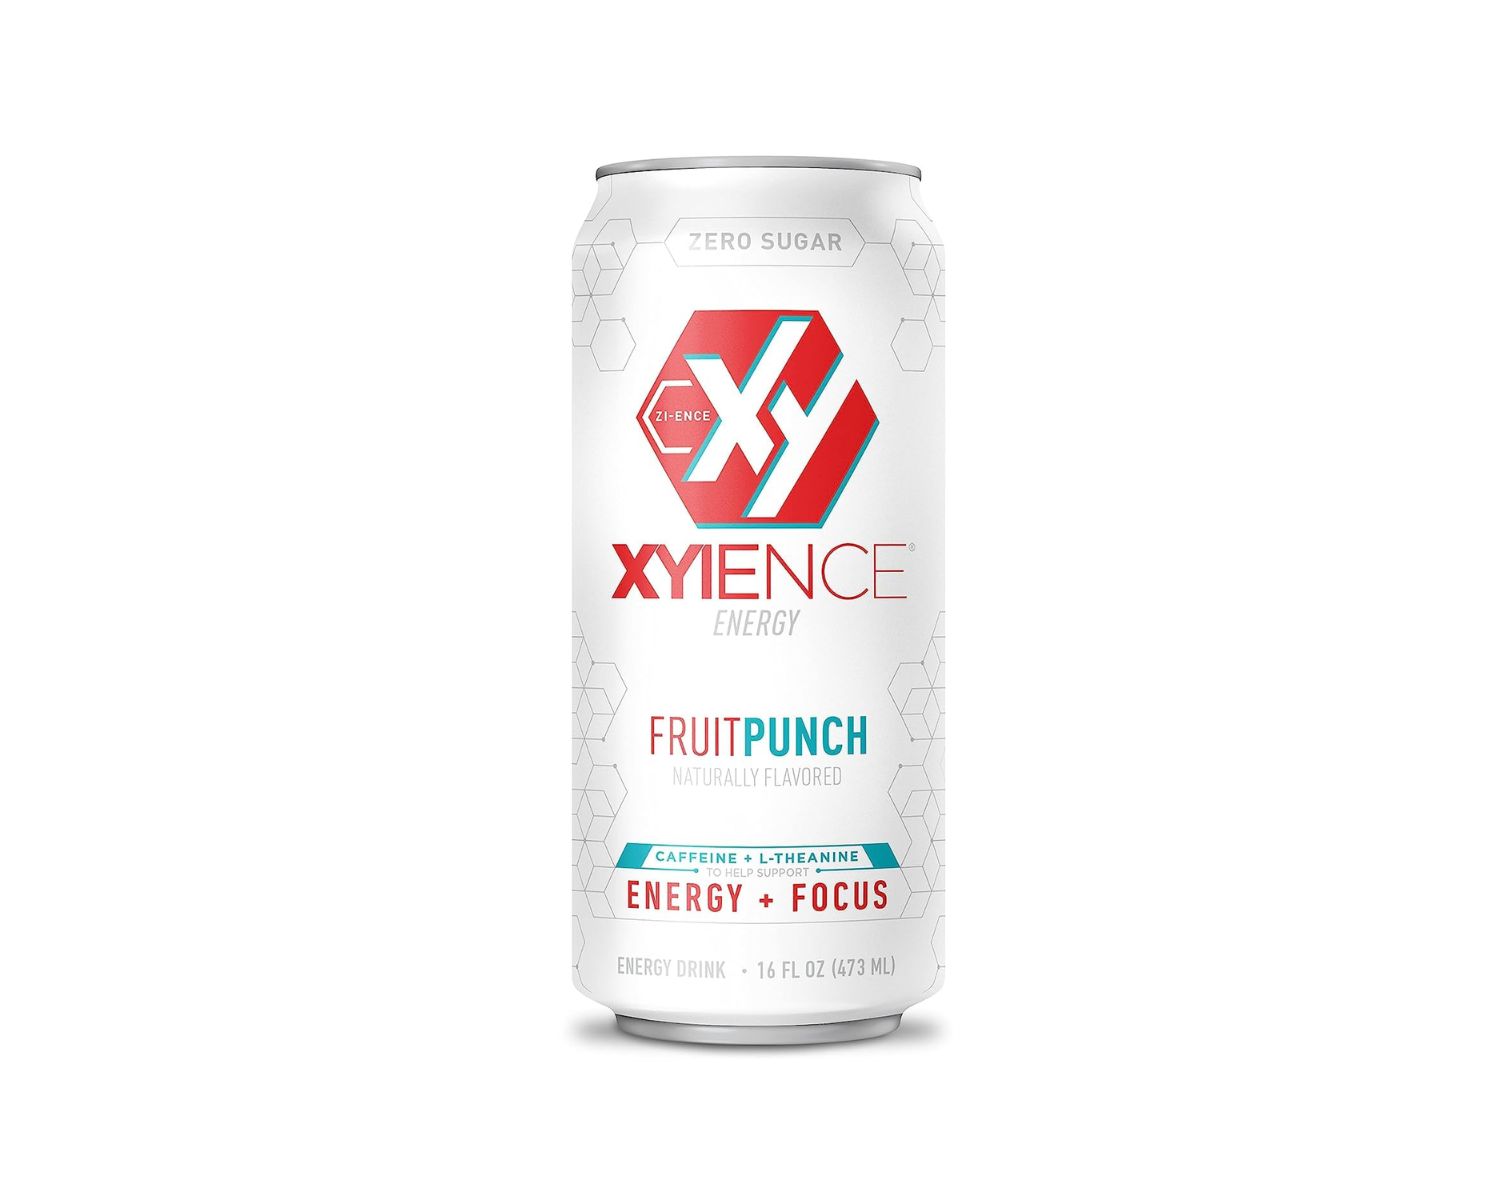 10-xyience-energy-drink-nutrition-facts